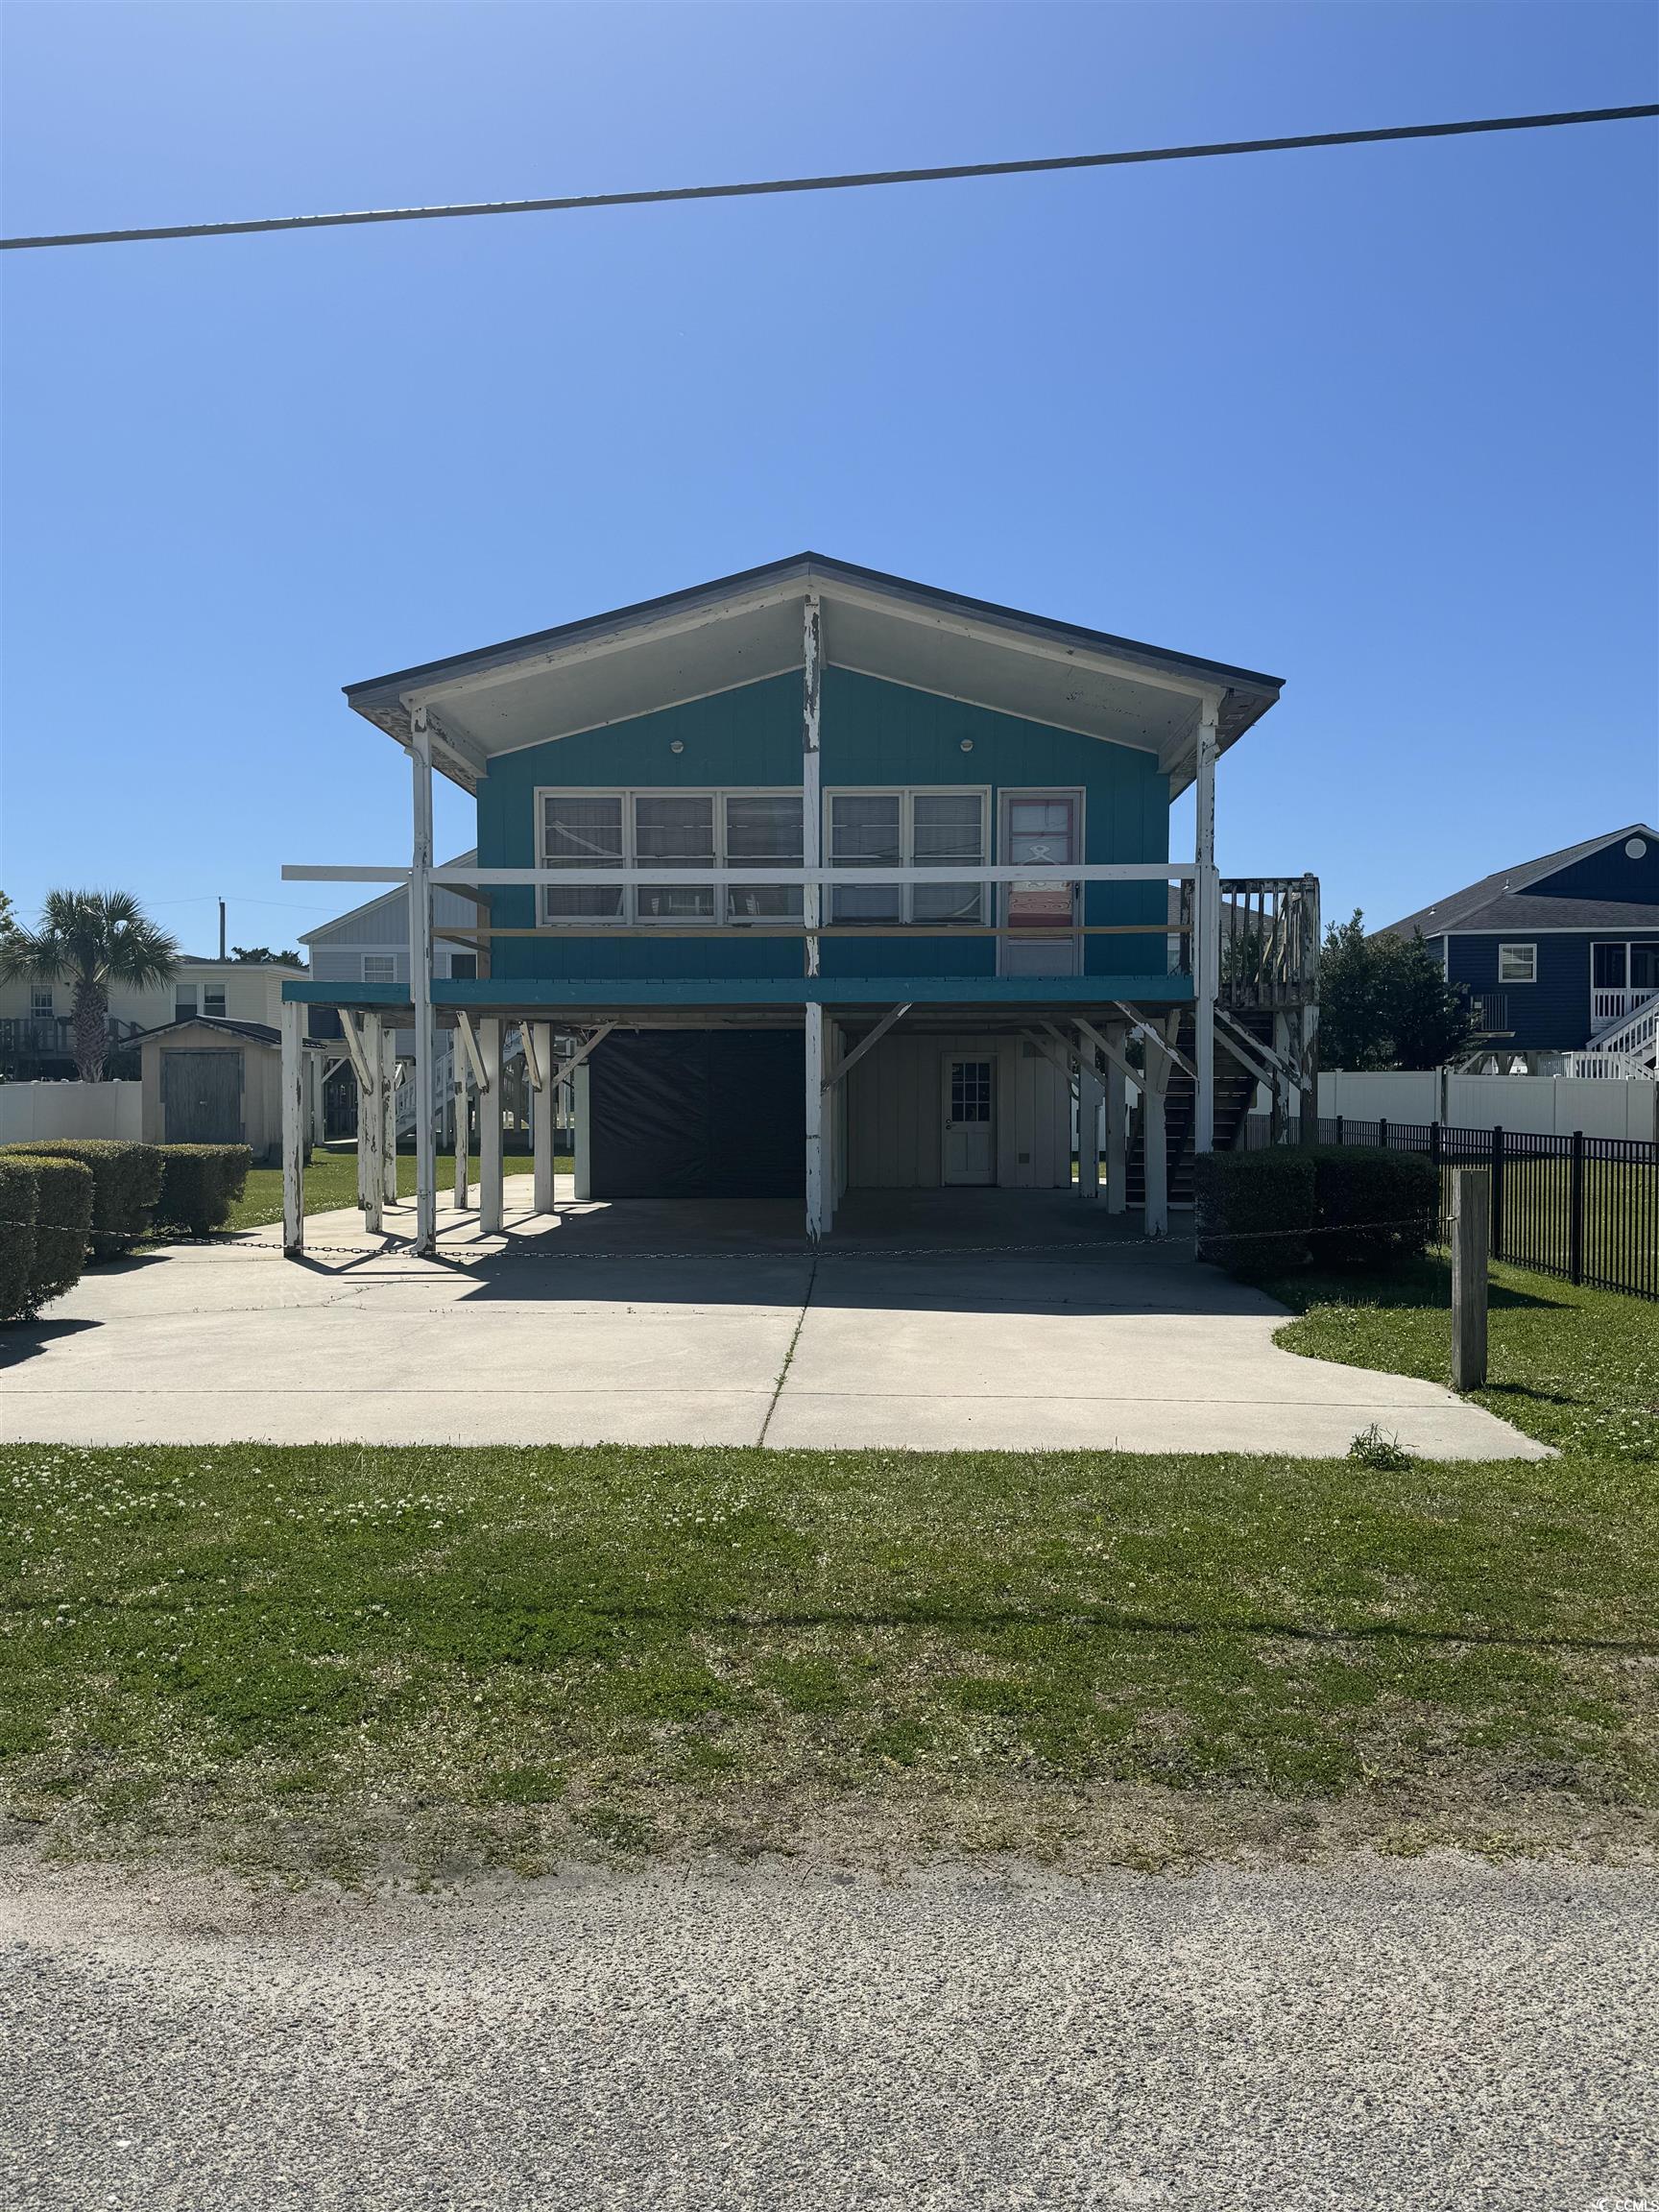 outstanding opportunity to own this 3 bedroom, 2 bath home situated on a lot and ½!  located in the highly desirable cherry grove section of north myrtle beach, this home is just 2 blocks from the ocean and one block from the peaceful marsh.  just a golf cart ride away from all that cherry grove has to offer – sandy beaches, restaurants, pubs, and shopping – this could be your chance to live the salt life or the perfect property to add to your rental investment portfolio.  all that’s needed is some tlc and personal touches and it could be an excellent opportunity to build your own equity!  home is being sold as-is with plenty of room to expand with the large side lot.  don’t miss this one-of-a-kind property!